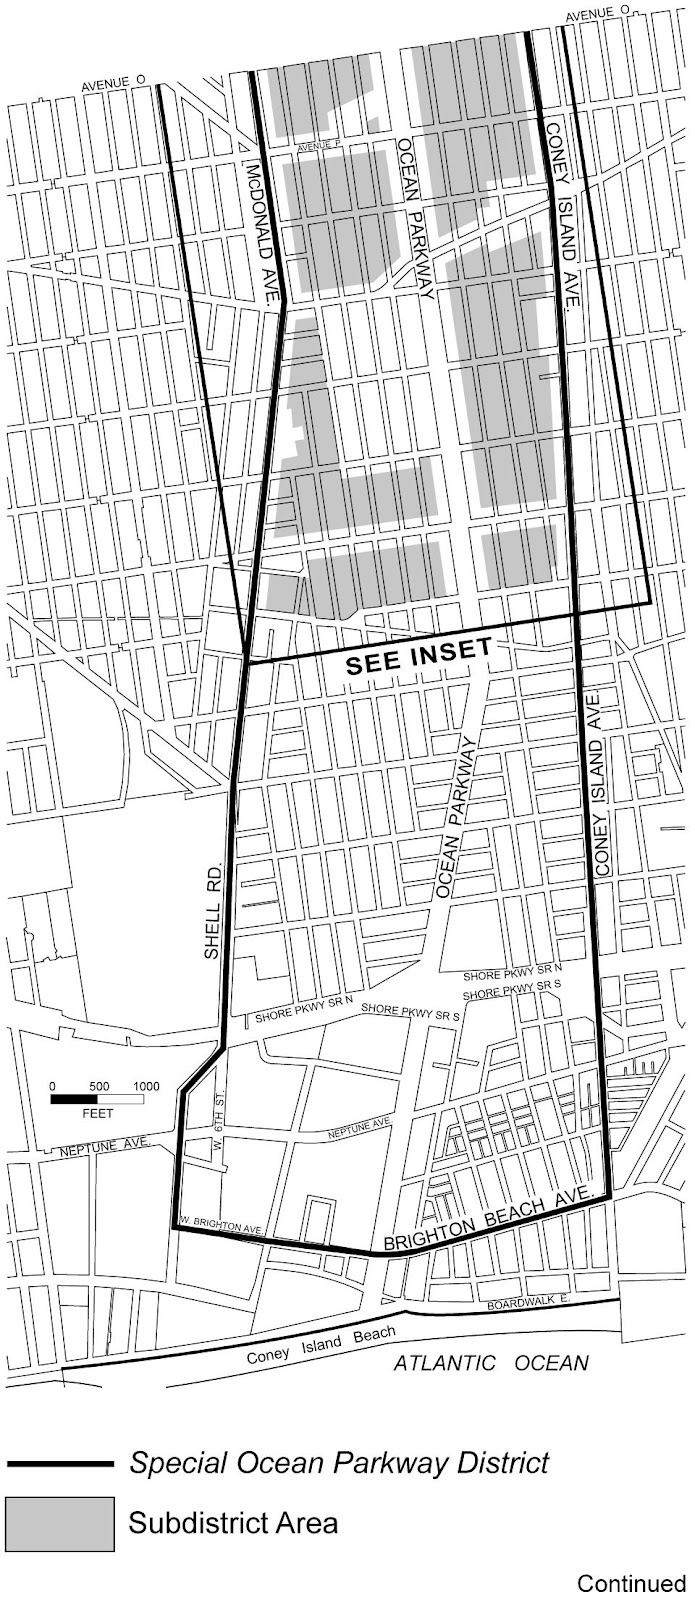 Zoning Resolutions Chapter 3: Special Ocean Parkway District Appendix A.1